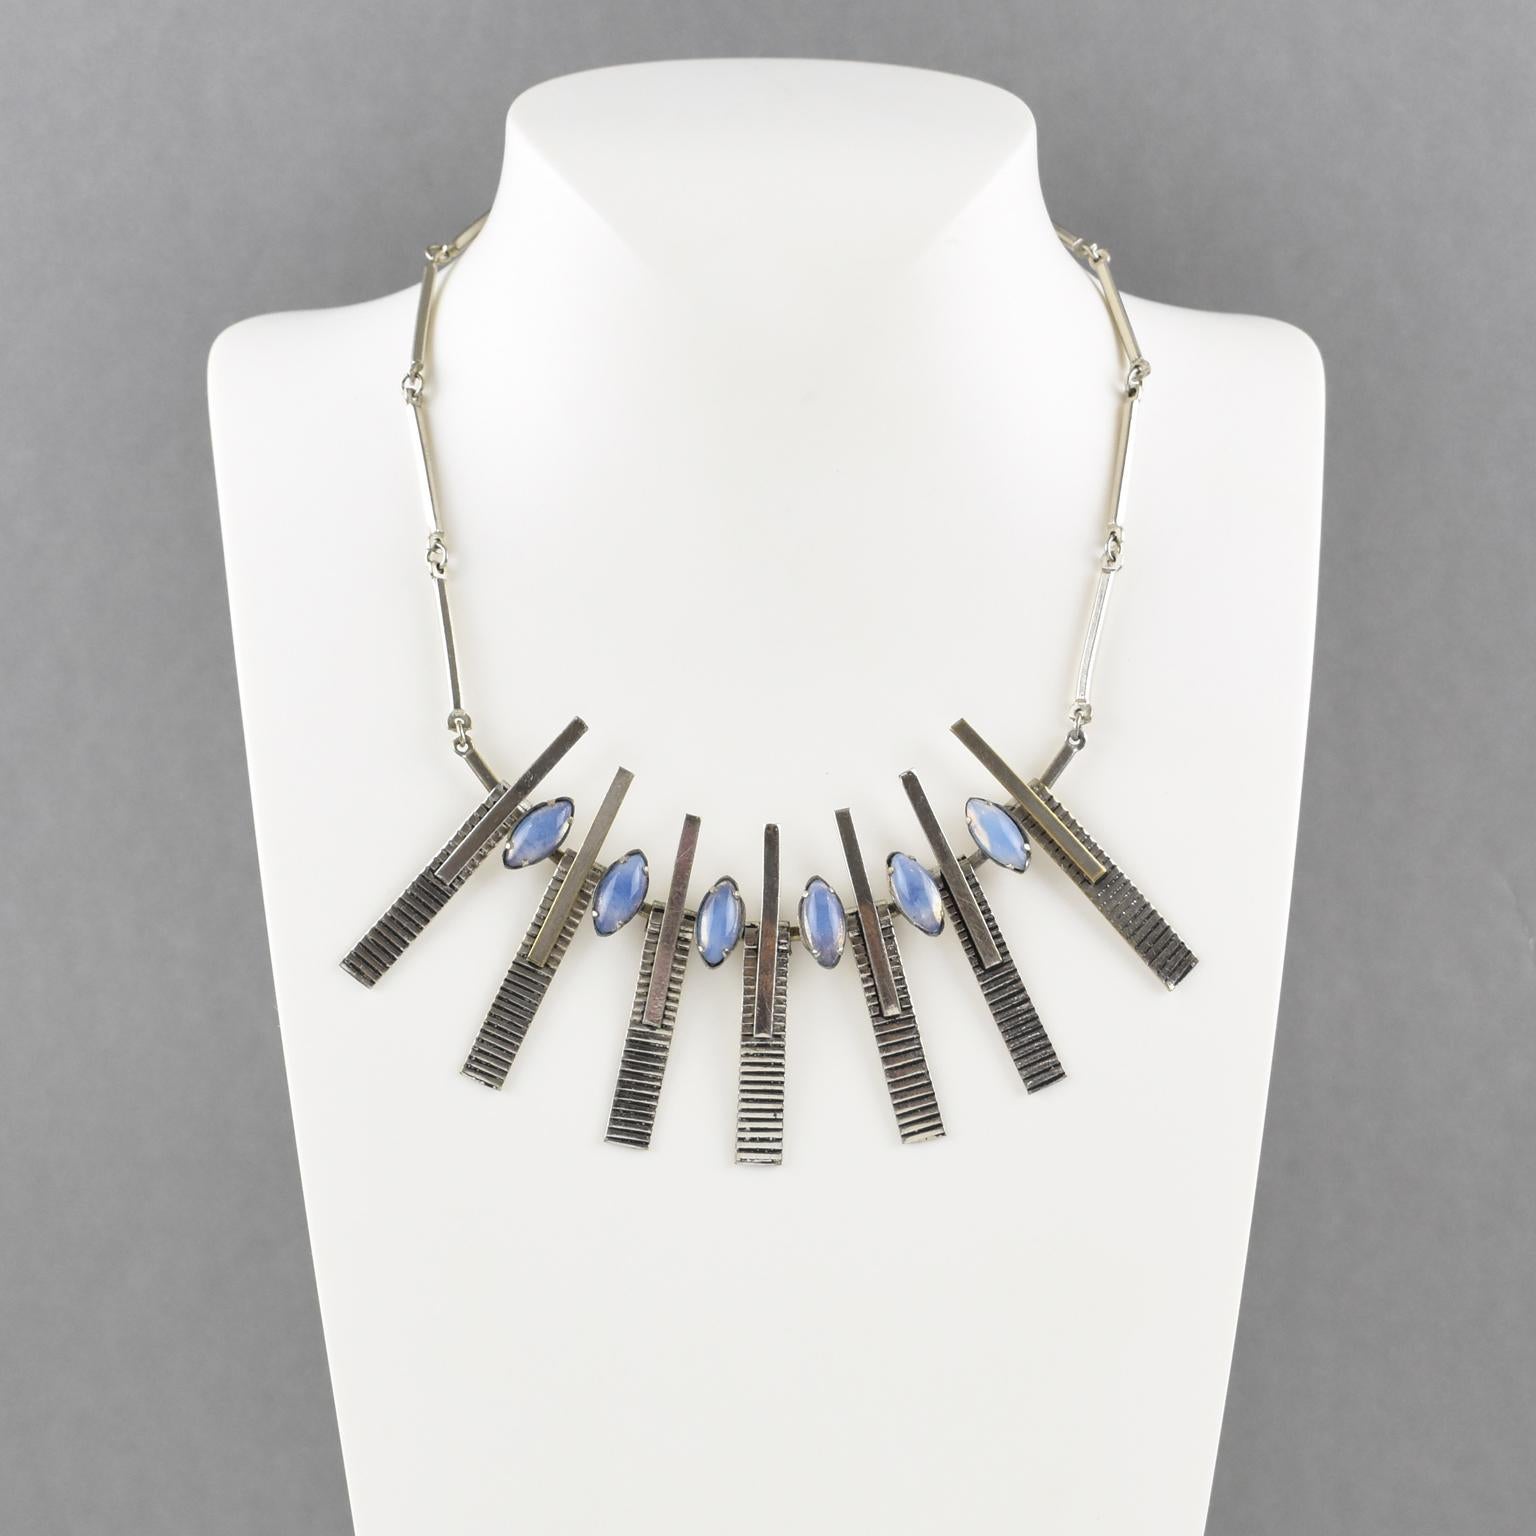 Space Age Chrome Choker Necklace with Blue Glass Cabochons In Good Condition For Sale In Atlanta, GA